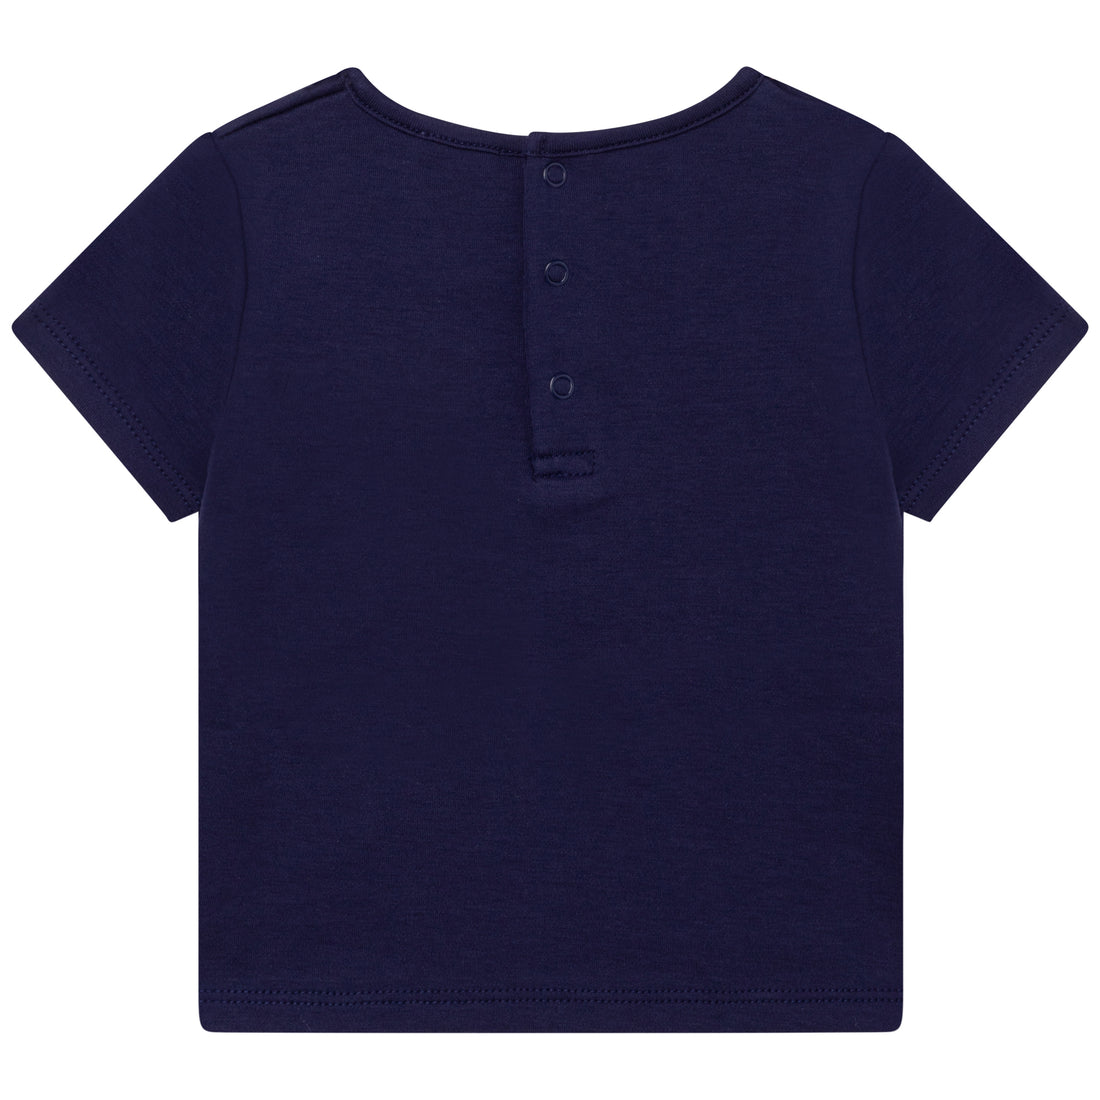 carrément-beau-short-sleeves-tee-shirt-spring-1-infant-navy-carr-s22-y05170-85t-6y- (3)